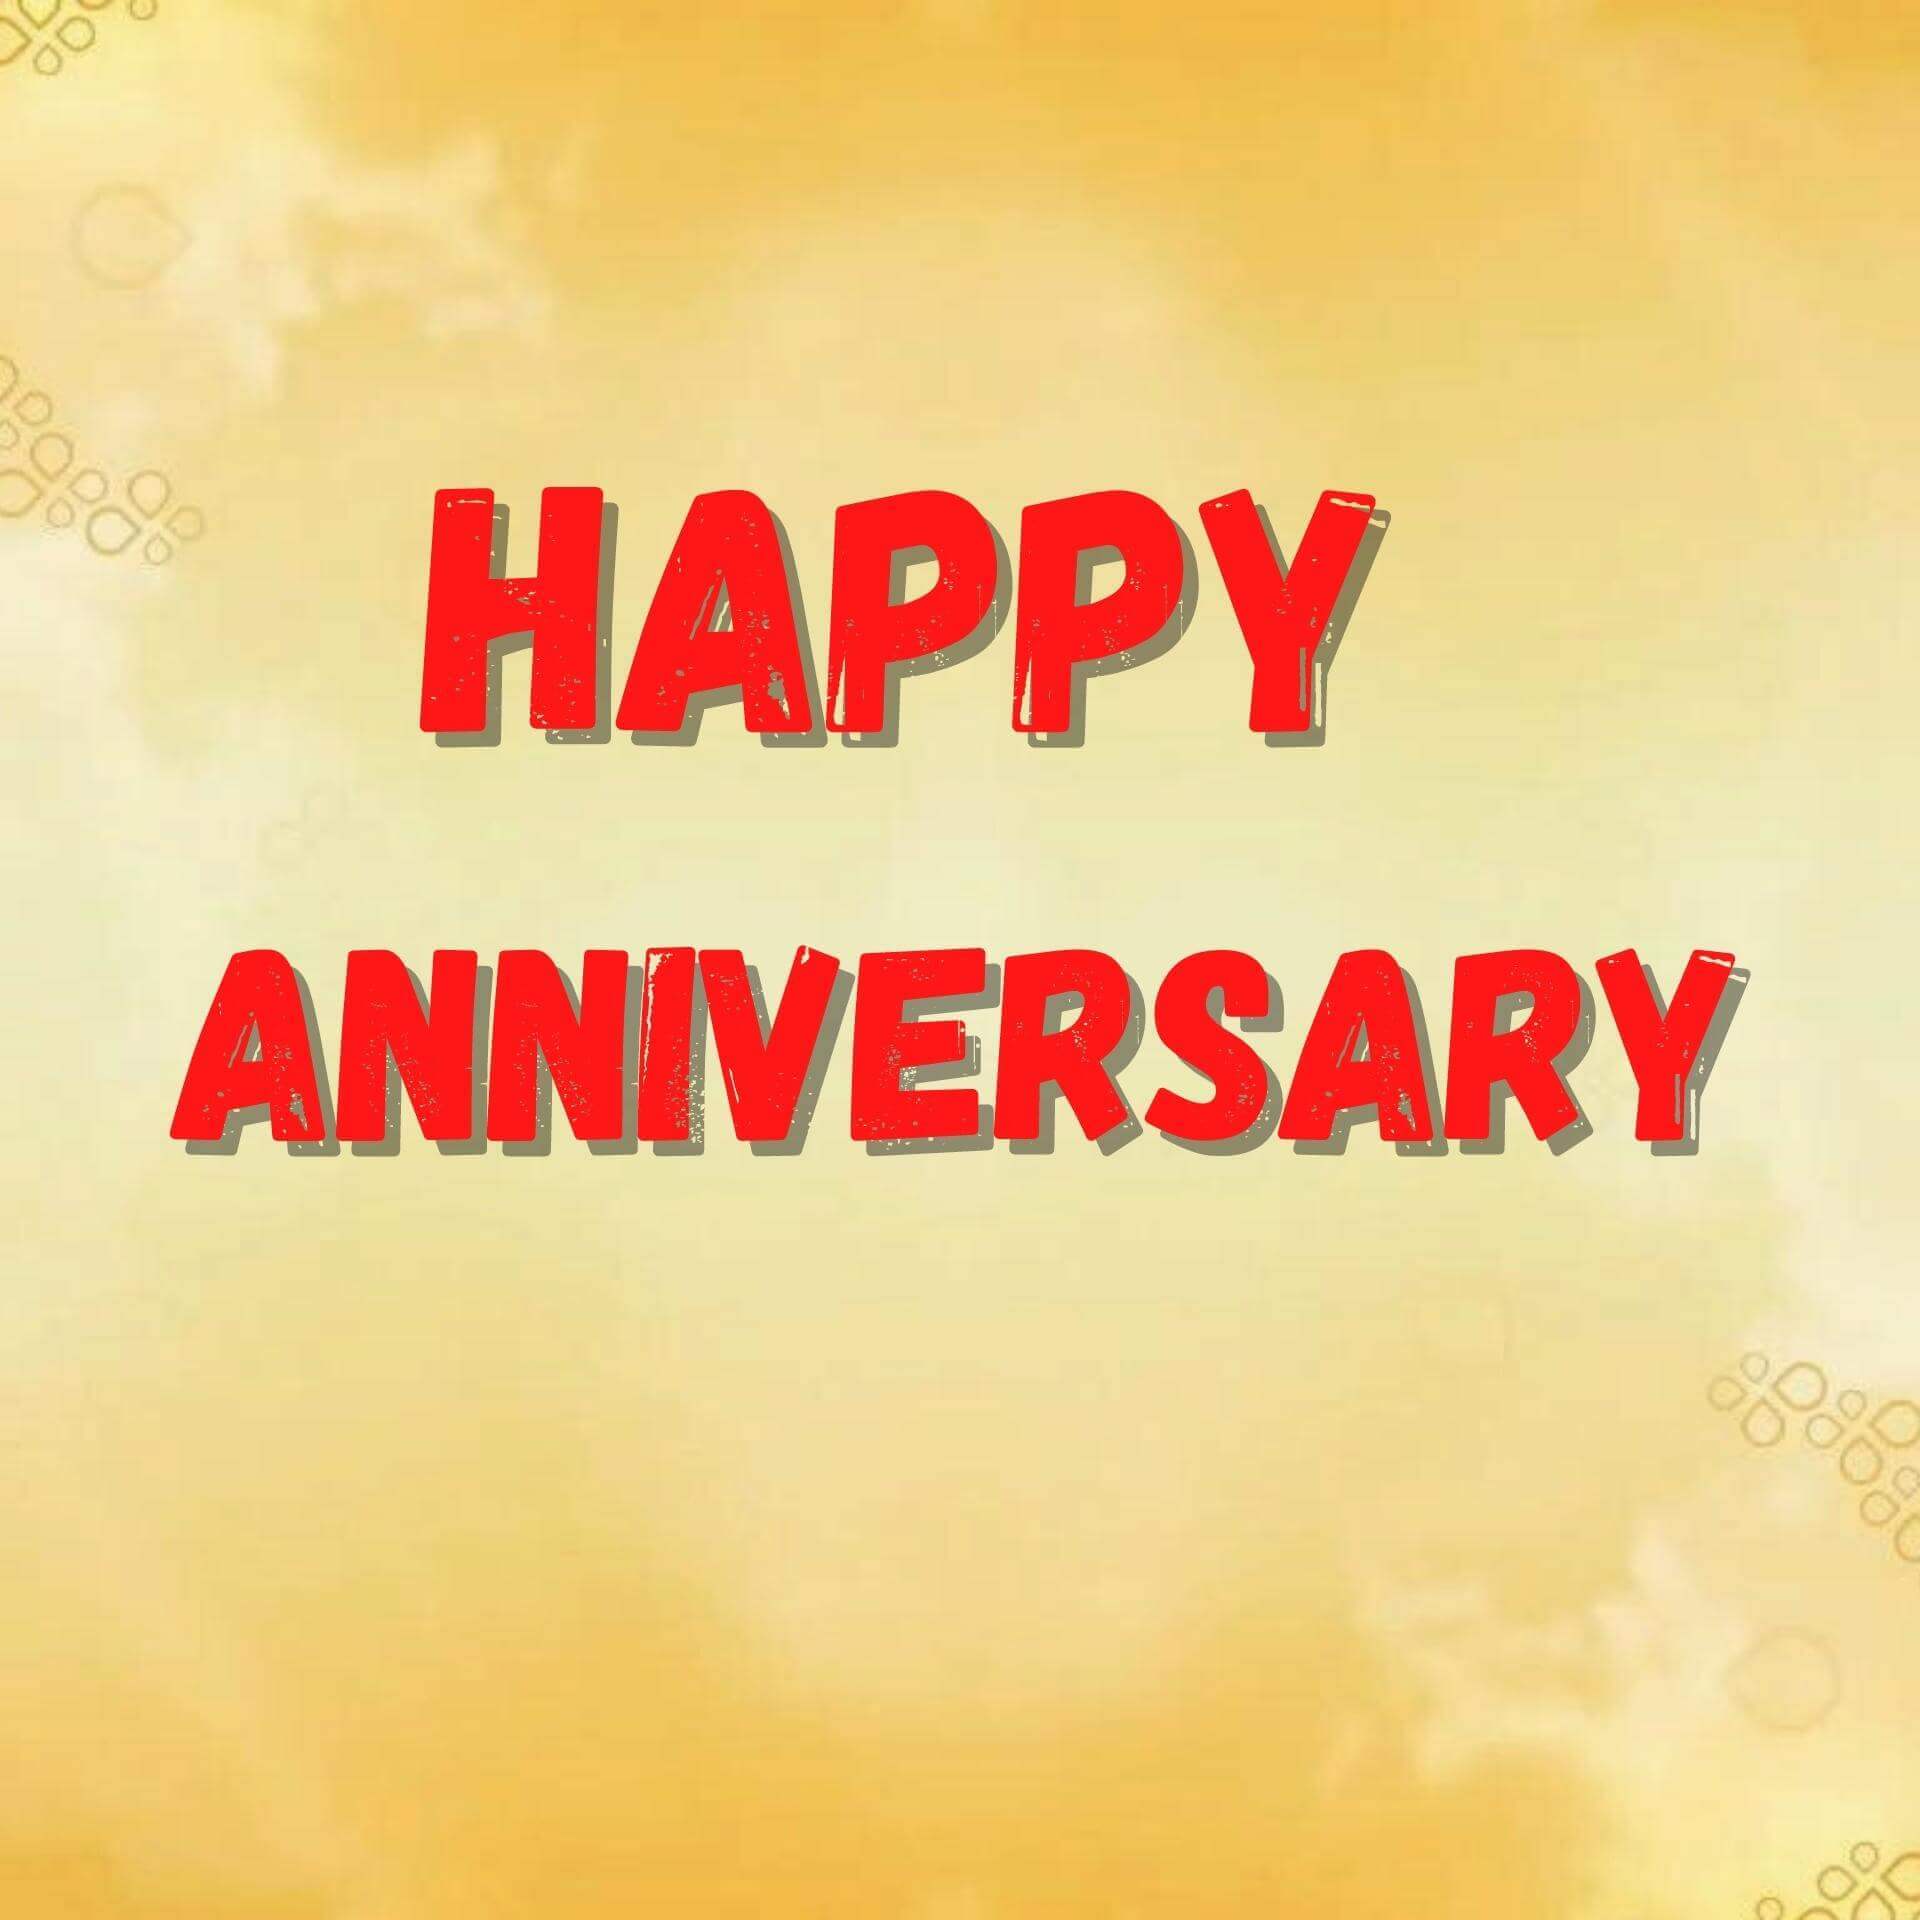 happy anniversary images Pics New Download